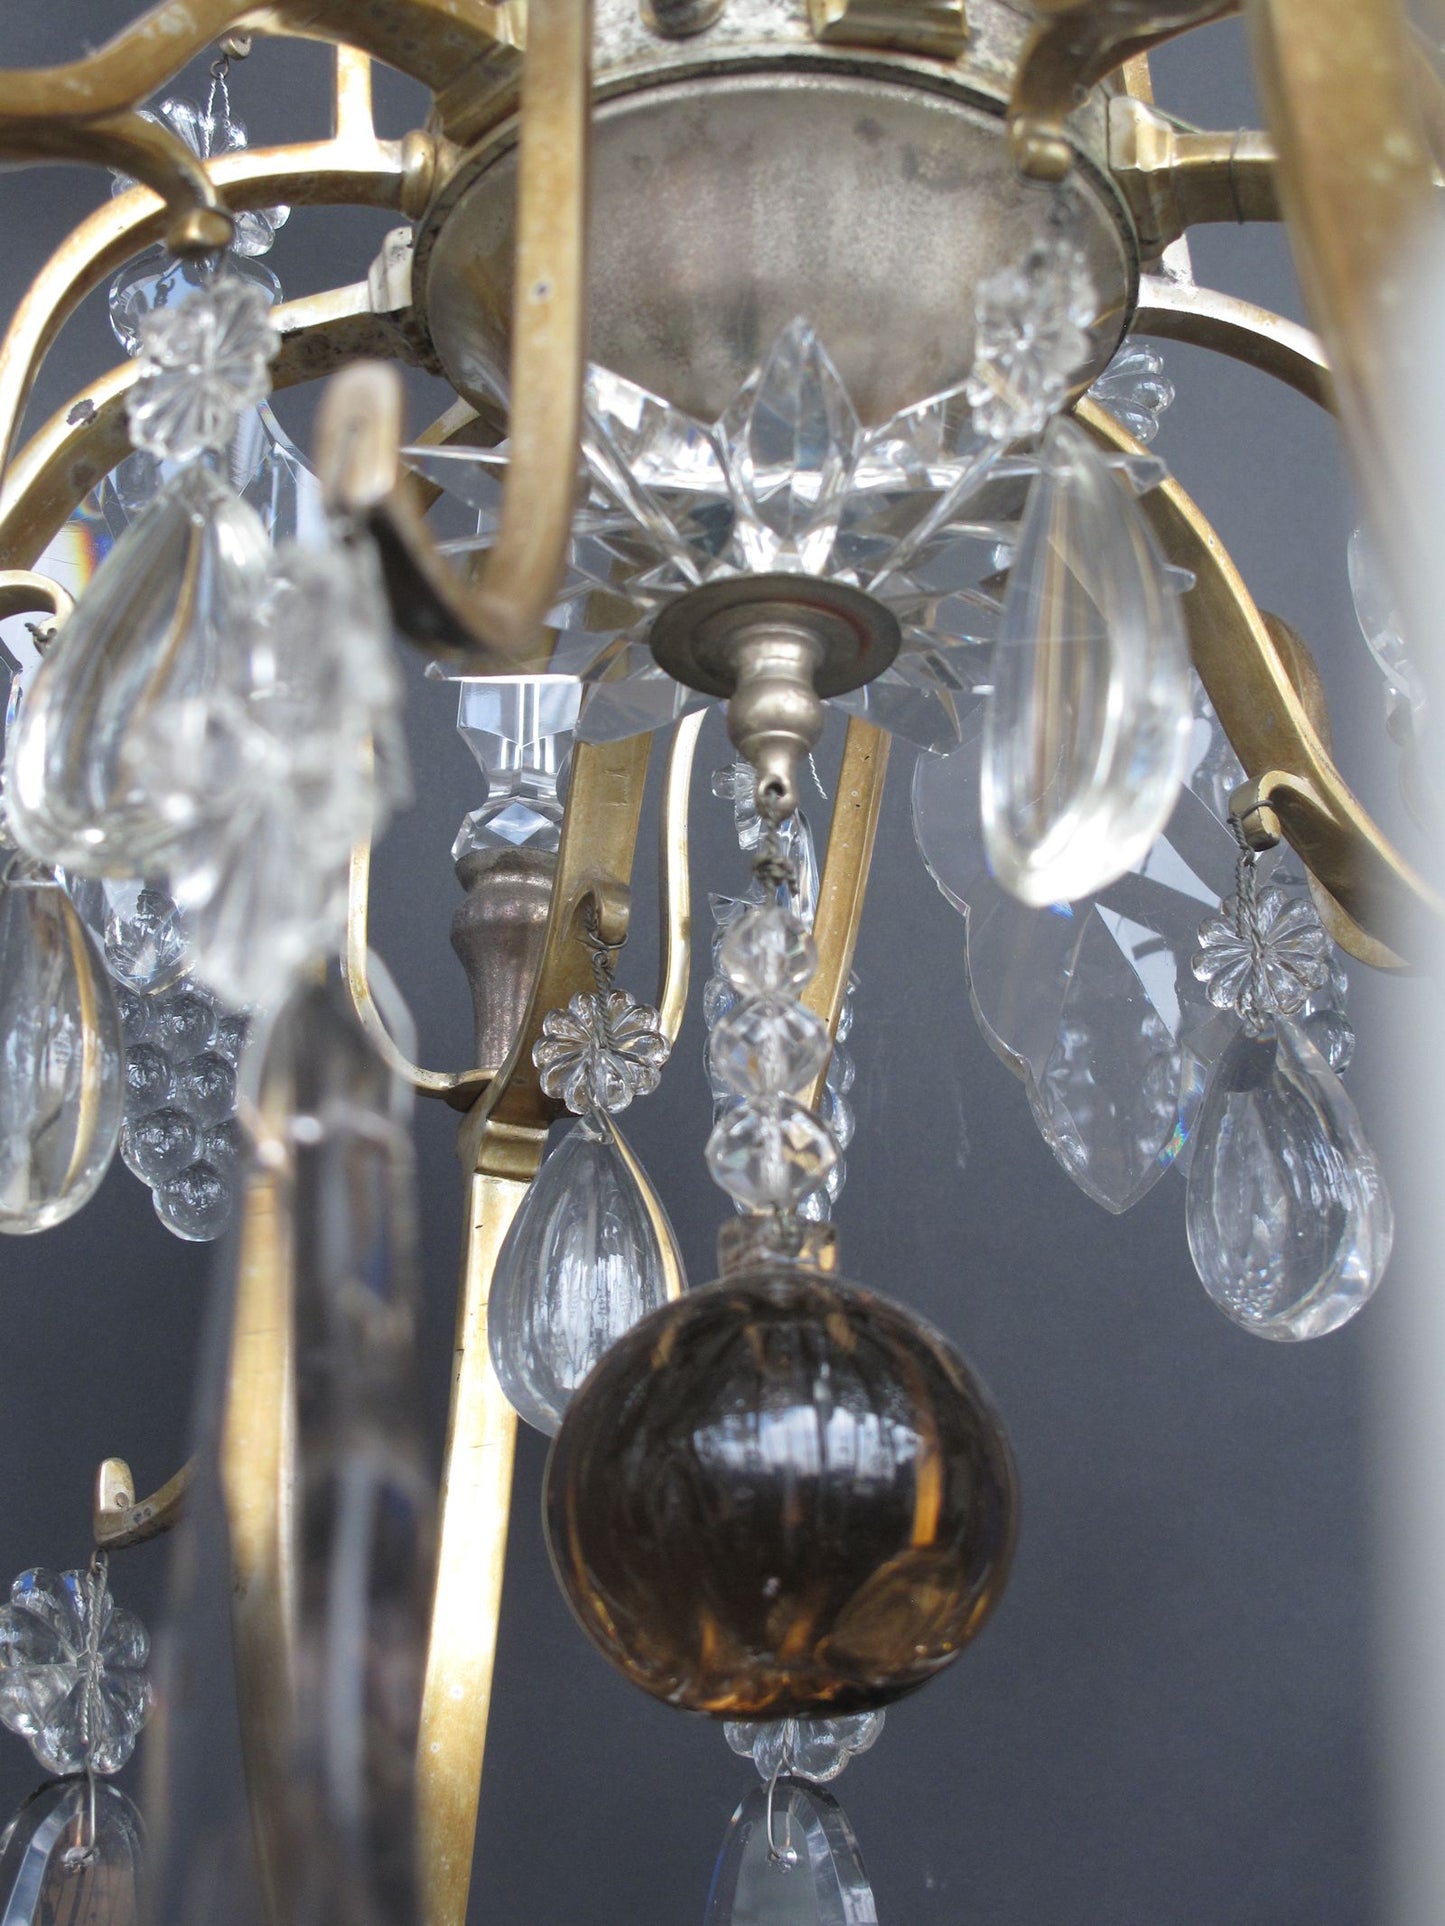 view of hanging fruit bubble at bottom of chandelier